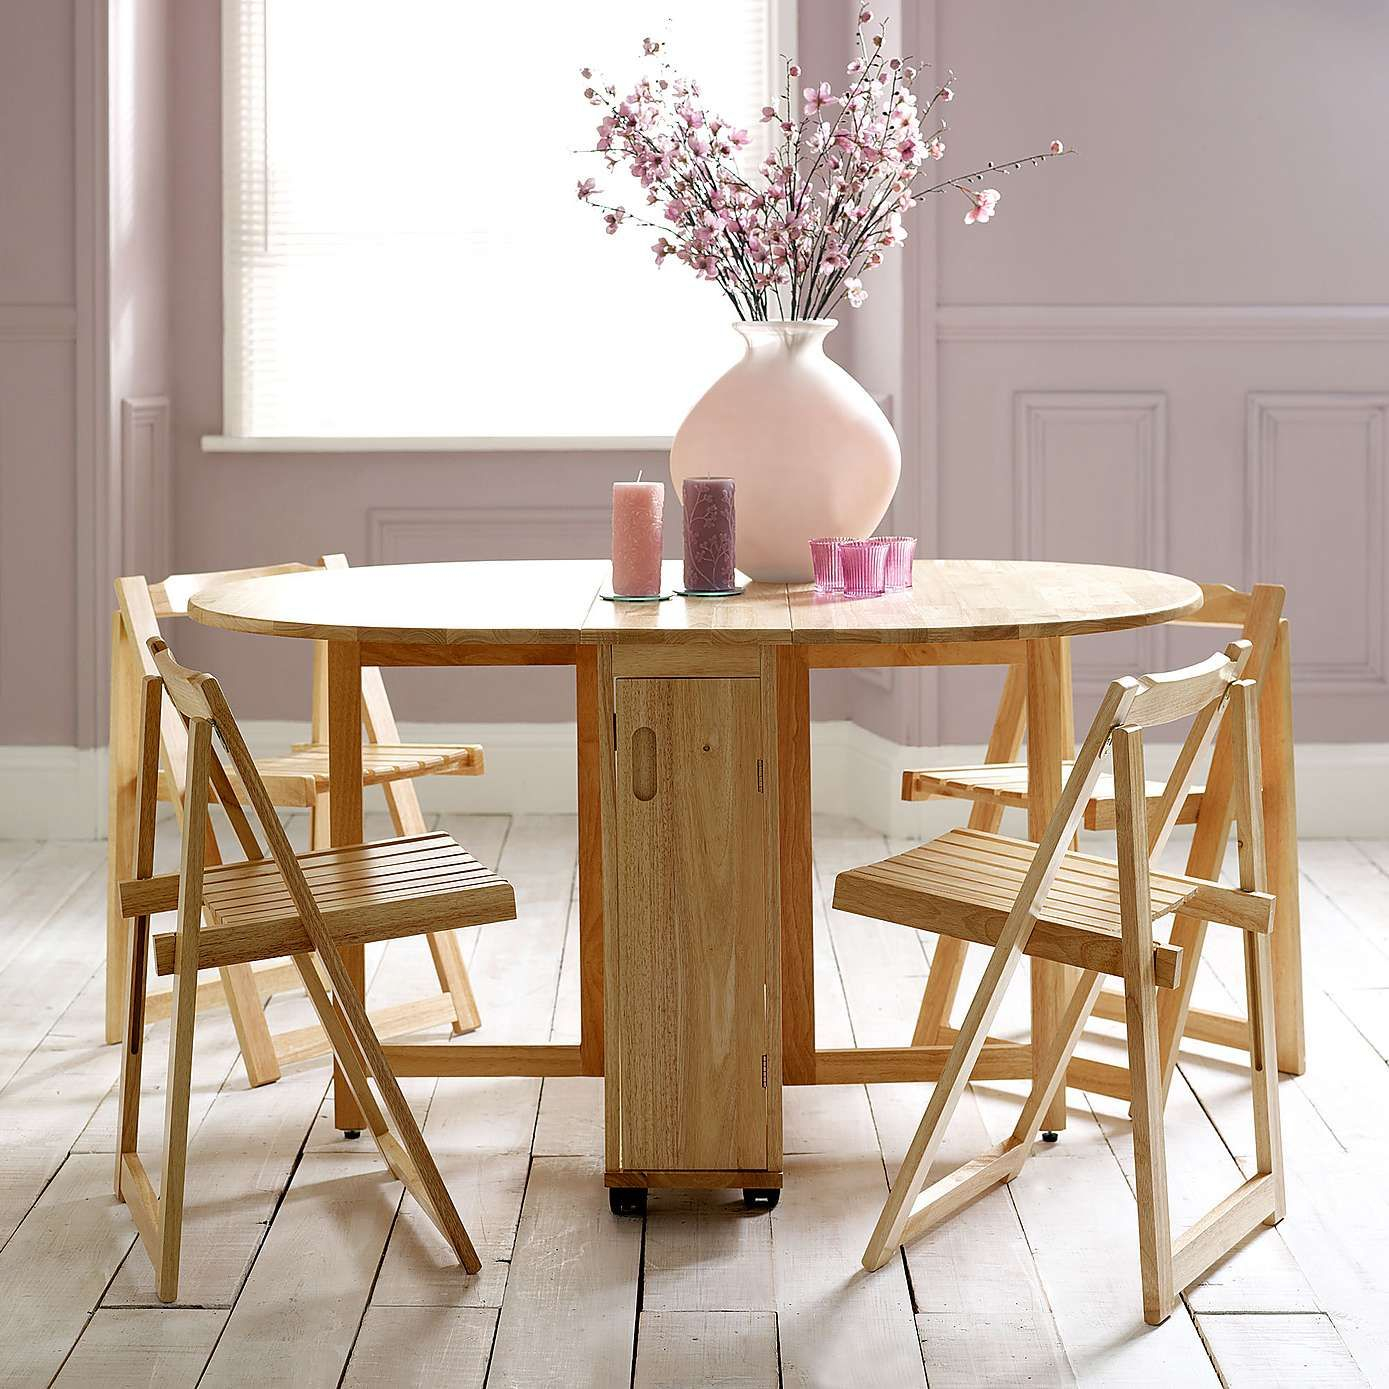 Rubberwood Butterfly Table With 4 Chairs Dunelm Folding throughout sizing 1389 X 1389